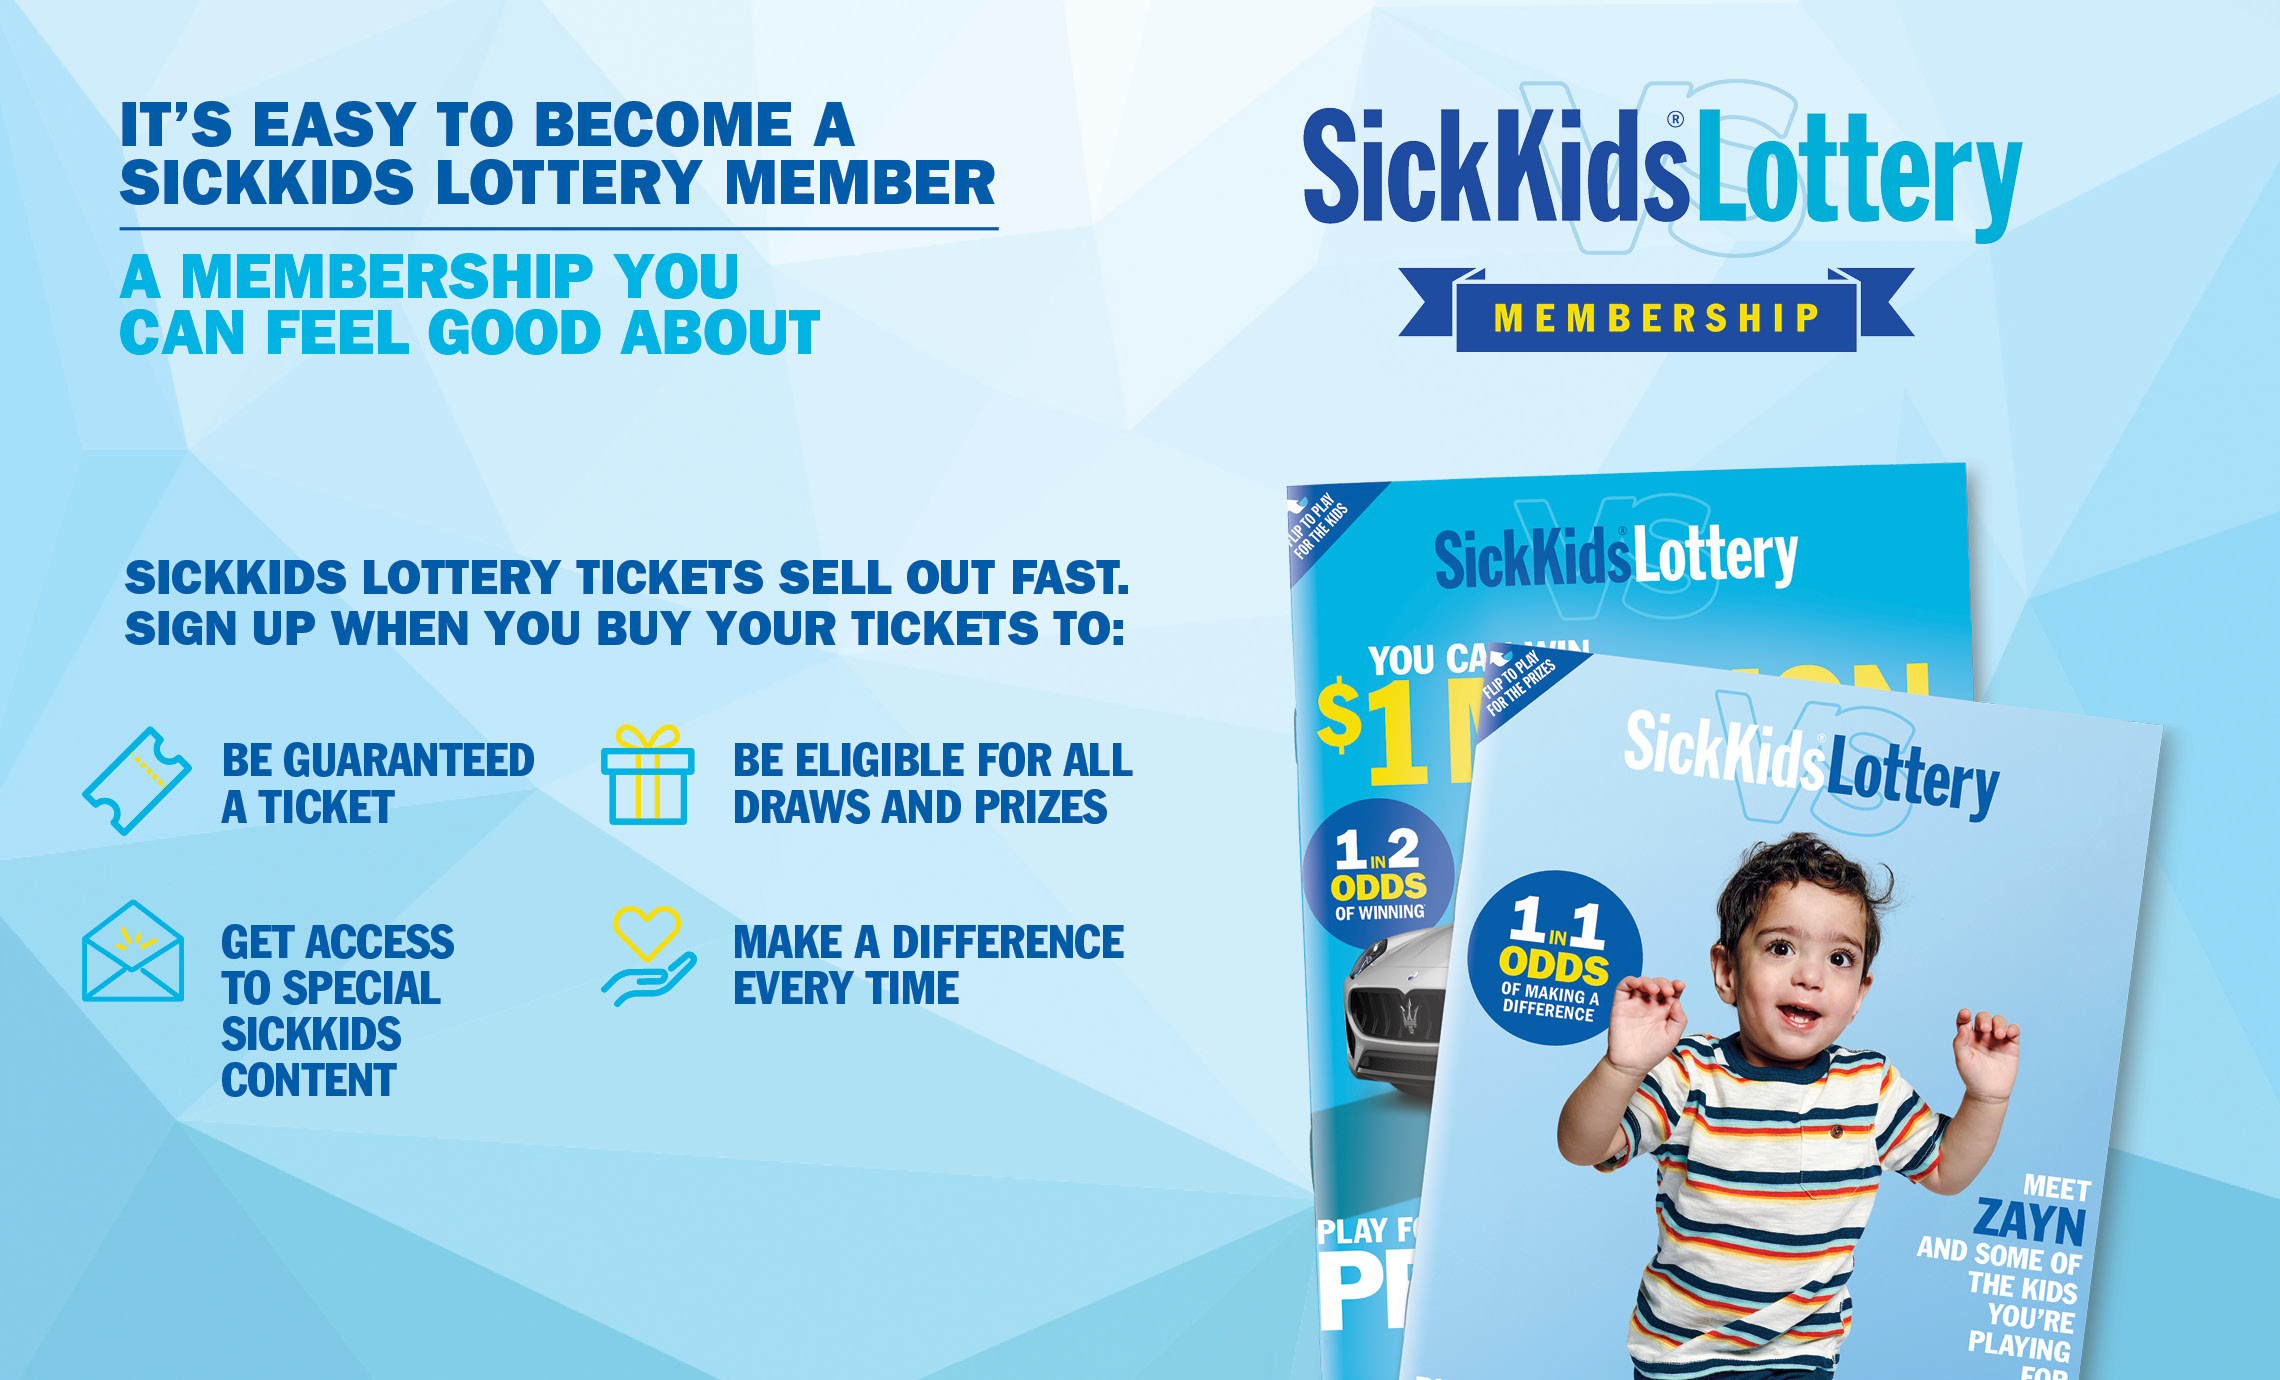 IT'S EASY TO BECOME A SICKKIDS LOTTERY MEMBER, A MEMBERSHIP YOU CAN FEEL GOOD ABOUT